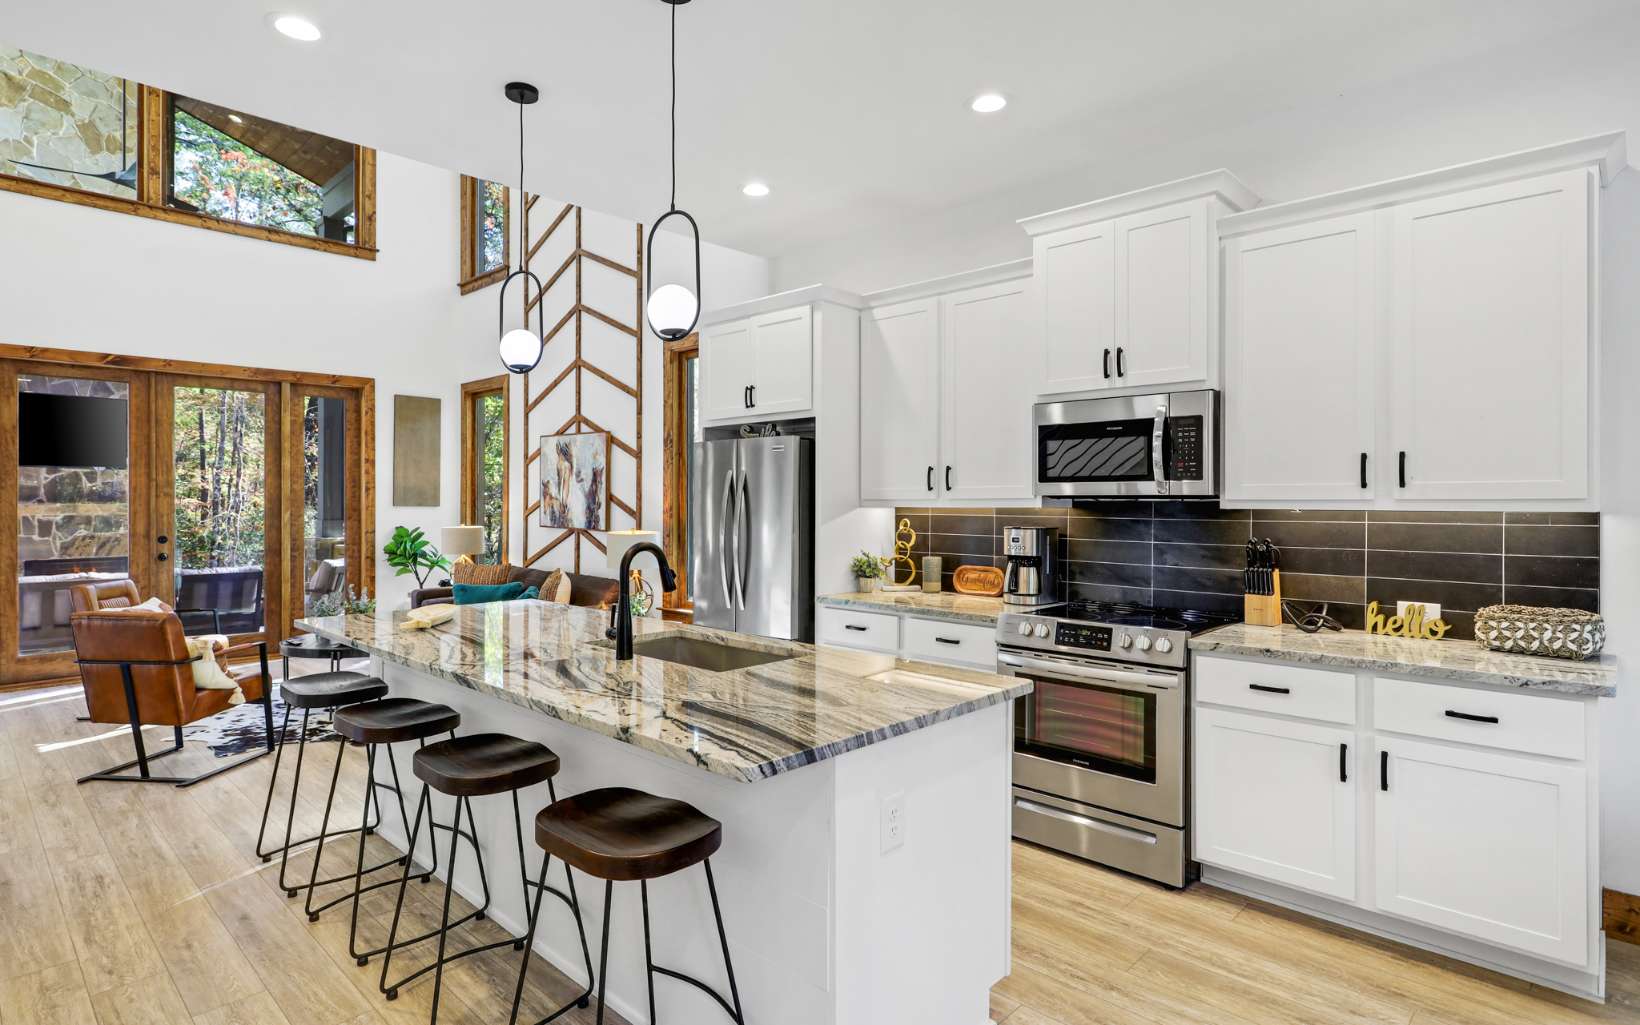 a kitchen with stainless steel appliances kitchen island granite countertop a stove a sink dishwasher a dining table and chairs with wooden floor